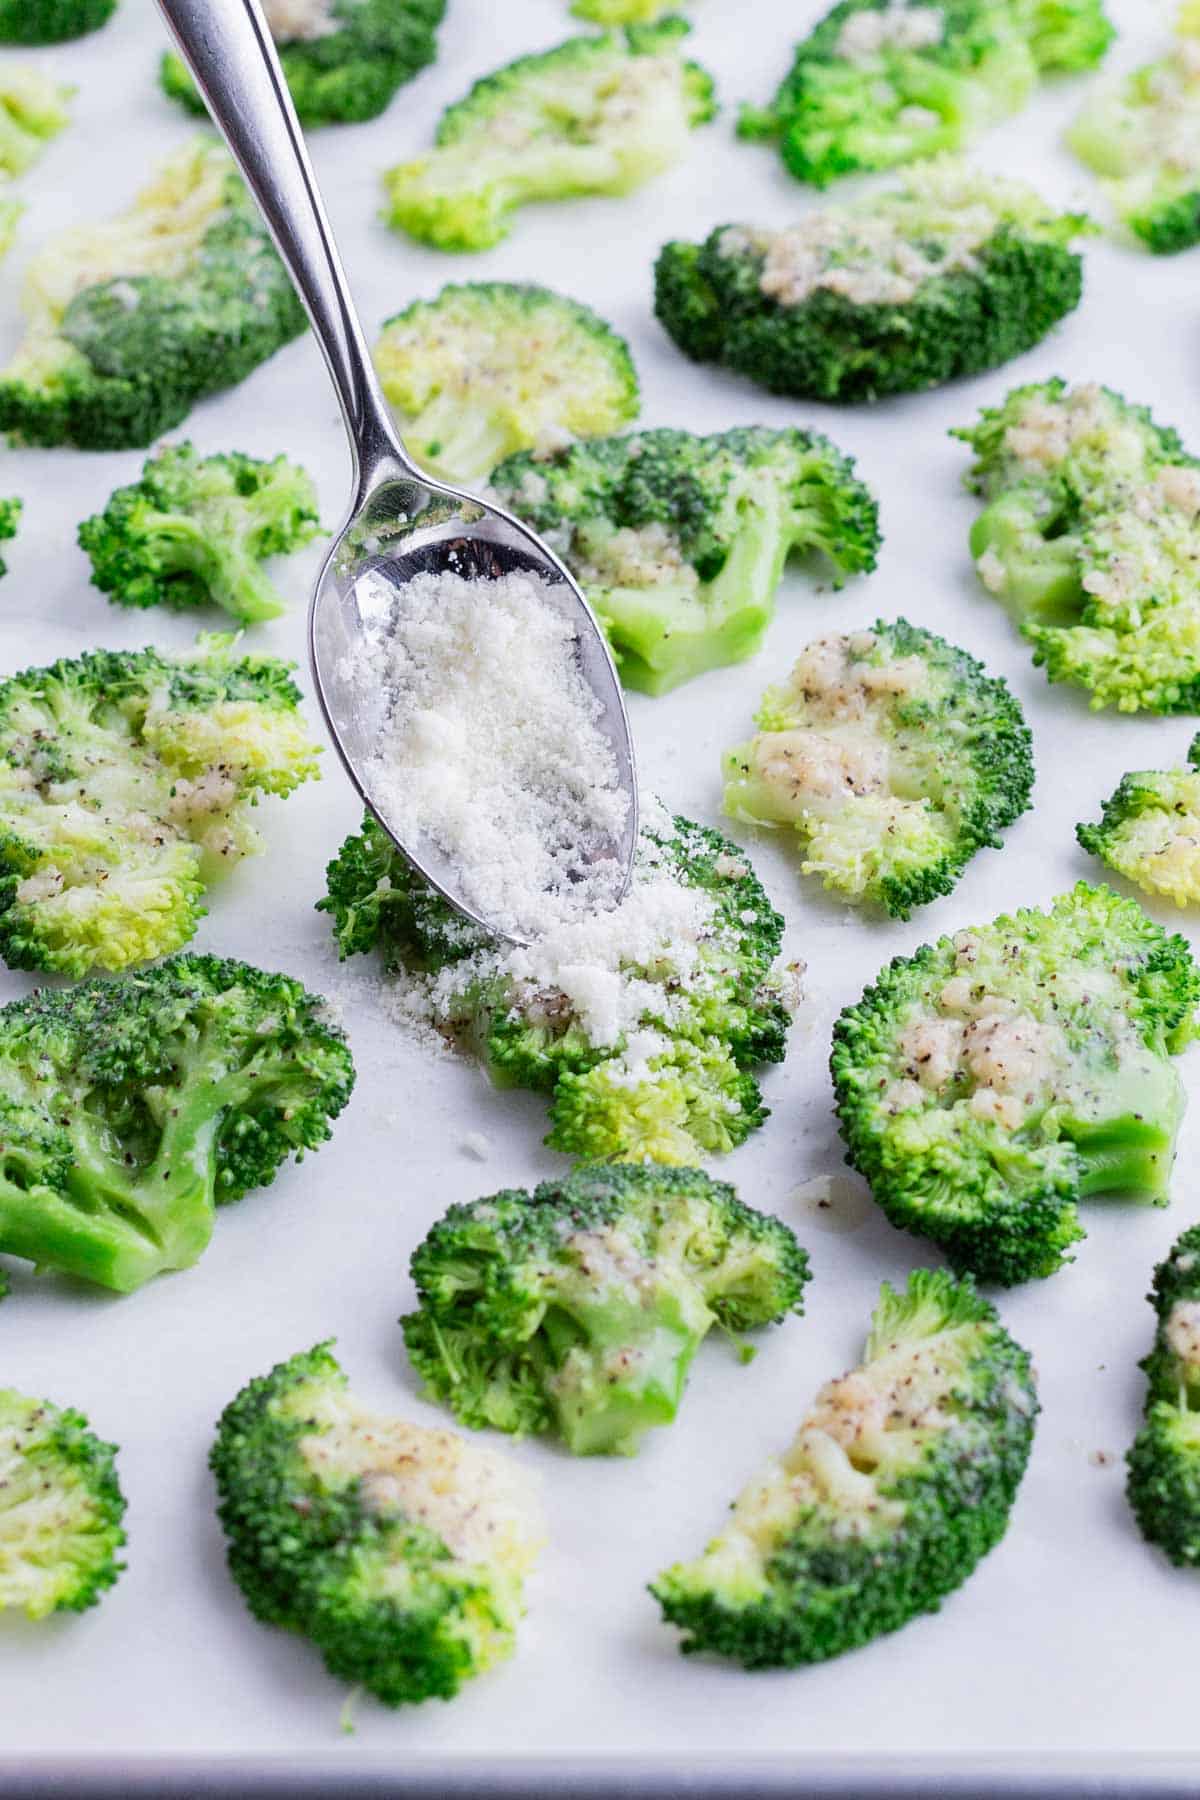 A spoon sprinkles cheese over the smashed broccoli.